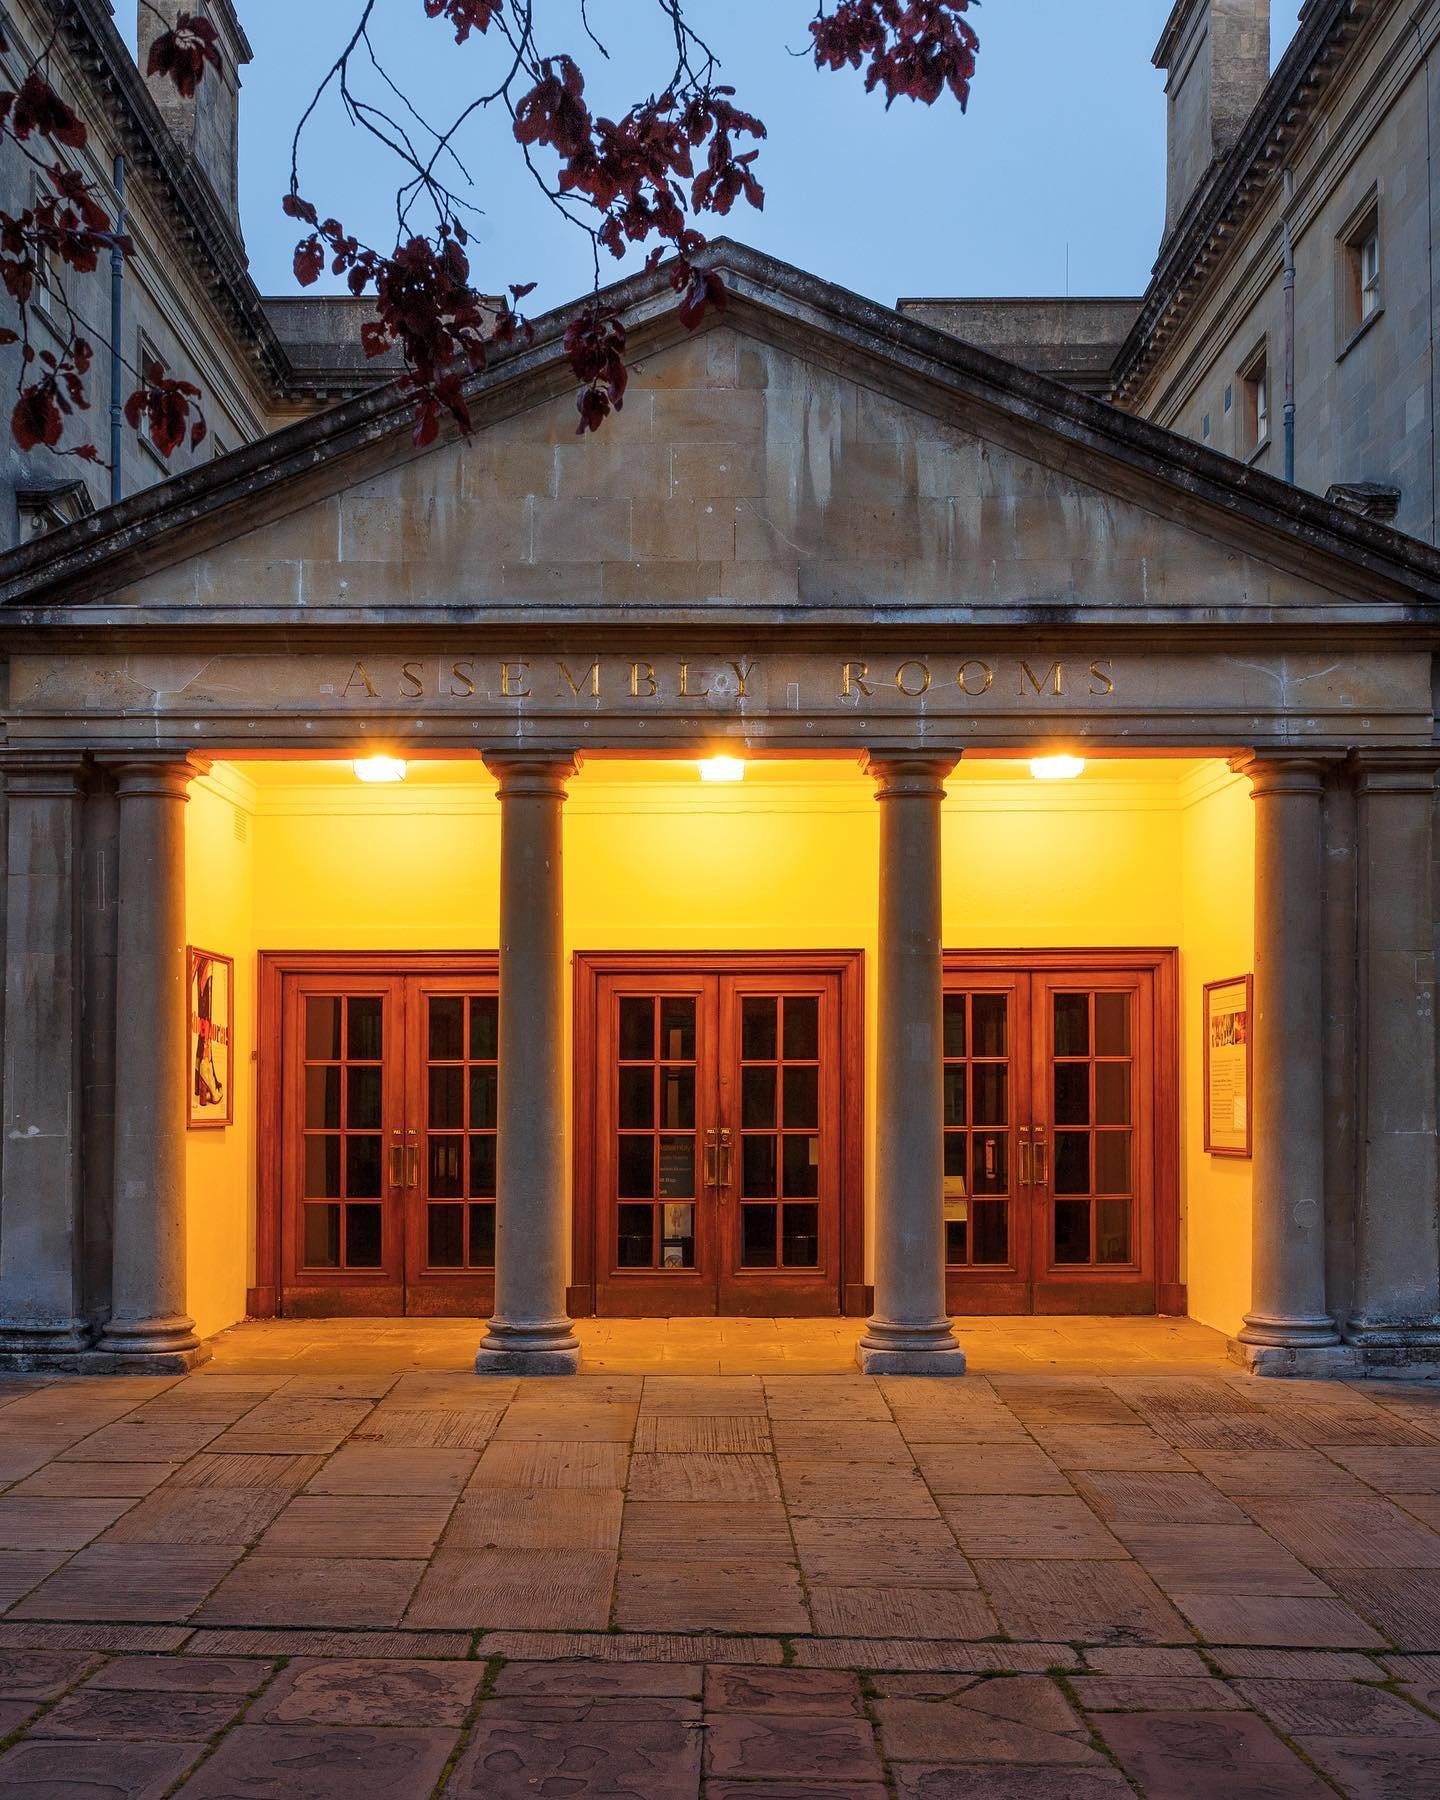 Located at the heart of fashionable society the Assembly Rooms were the place to be and to be seen in Georgian Bath. Built in 1771 as a place for music and dancing each of the four internal rooms consisted of expansive places for exclusive events and